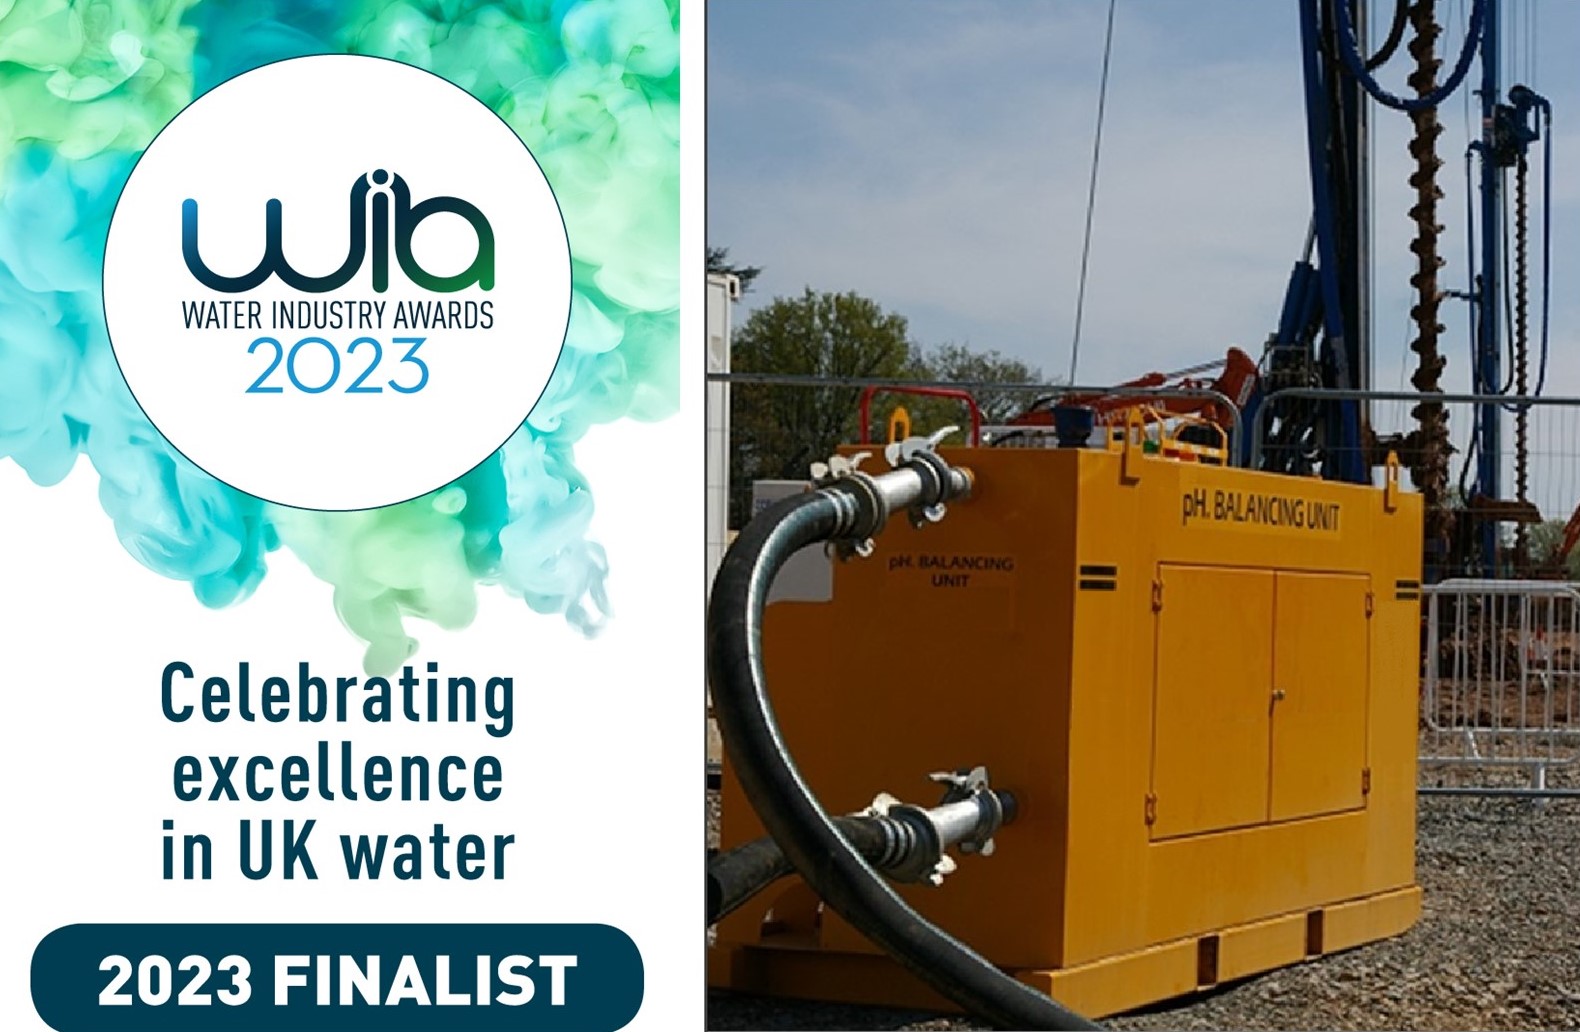 Smart Storm's Neutralizer; 2023 finalist in the Polution Mitigation Category at the Water Industry Awards